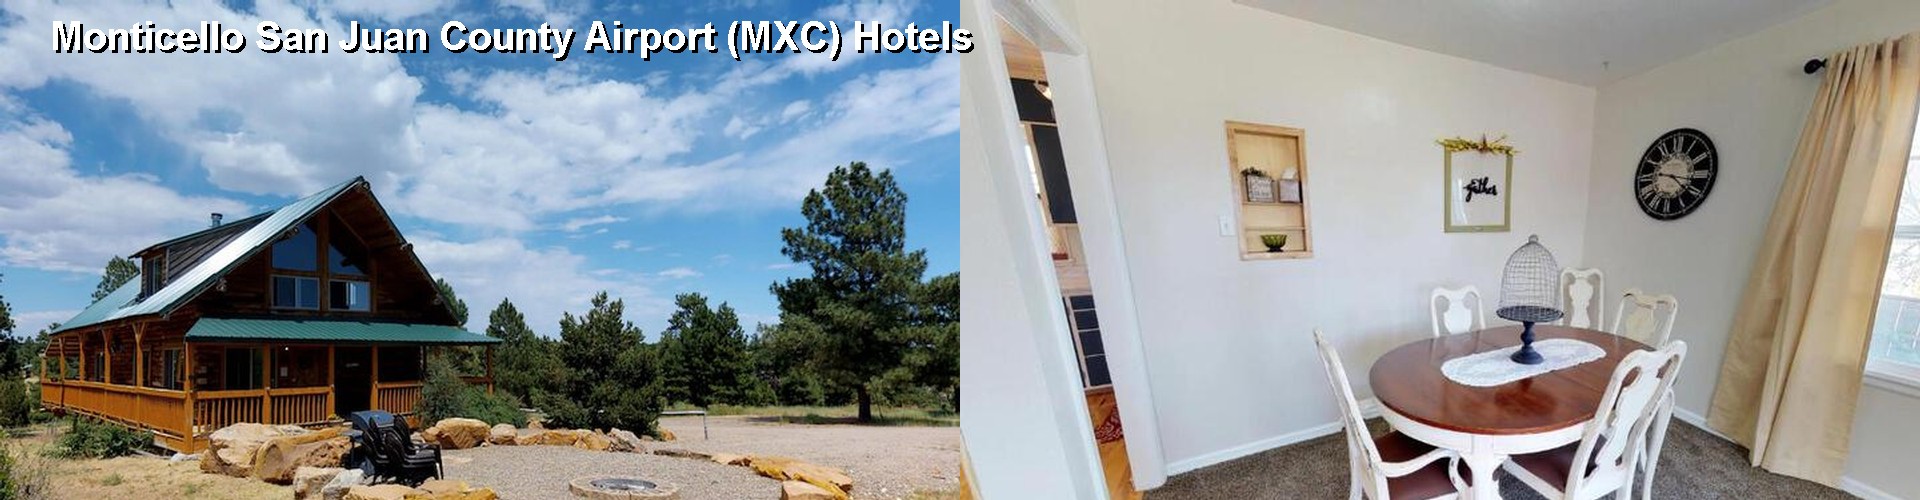 2 Best Hotels near Monticello San Juan County Airport (MXC)